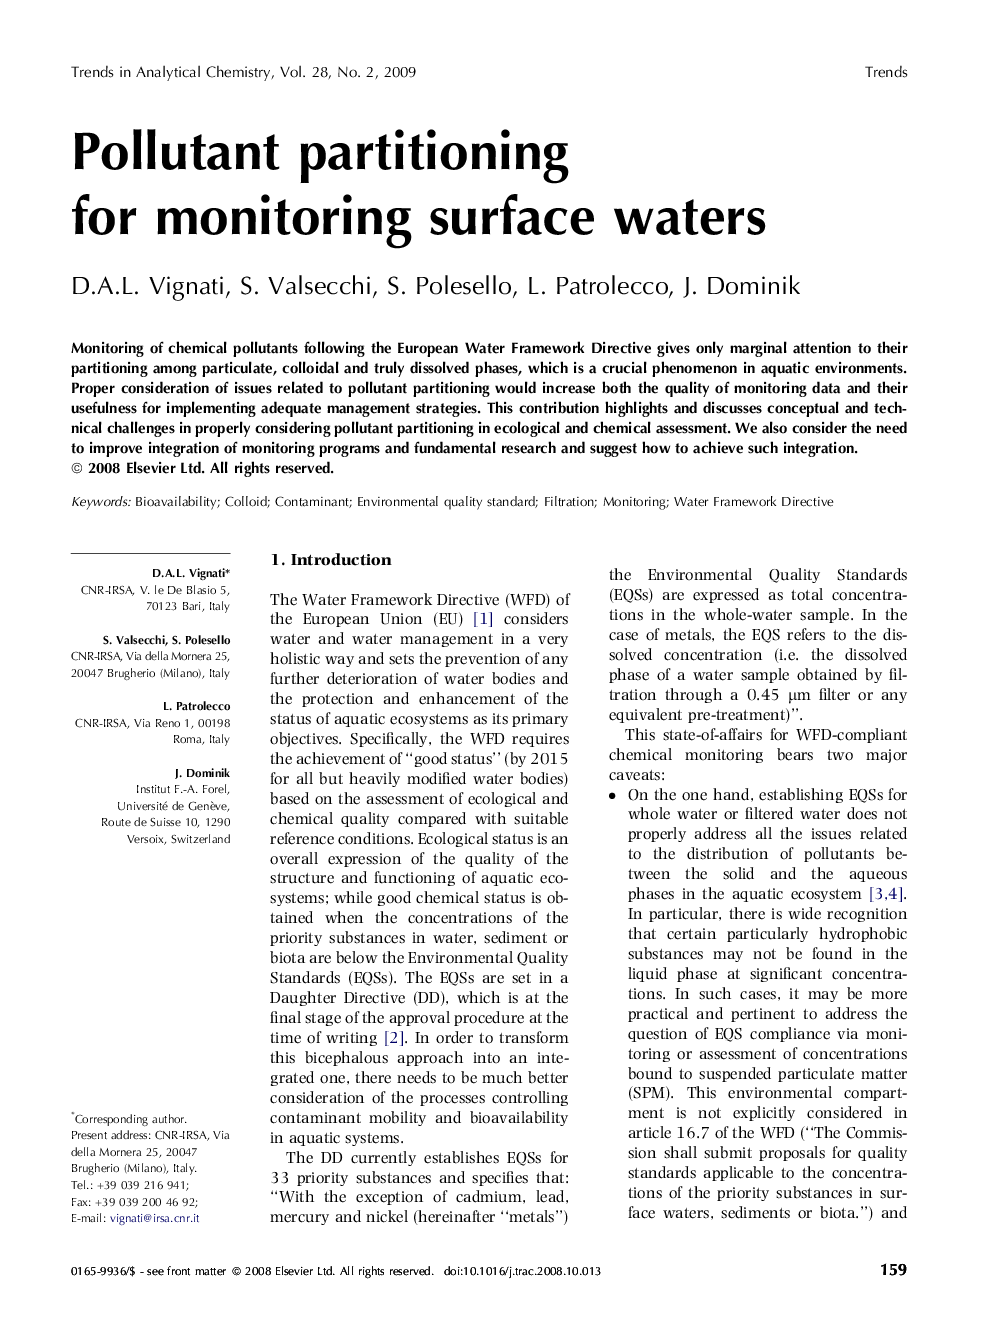 Pollutant partitioning for monitoring surface waters